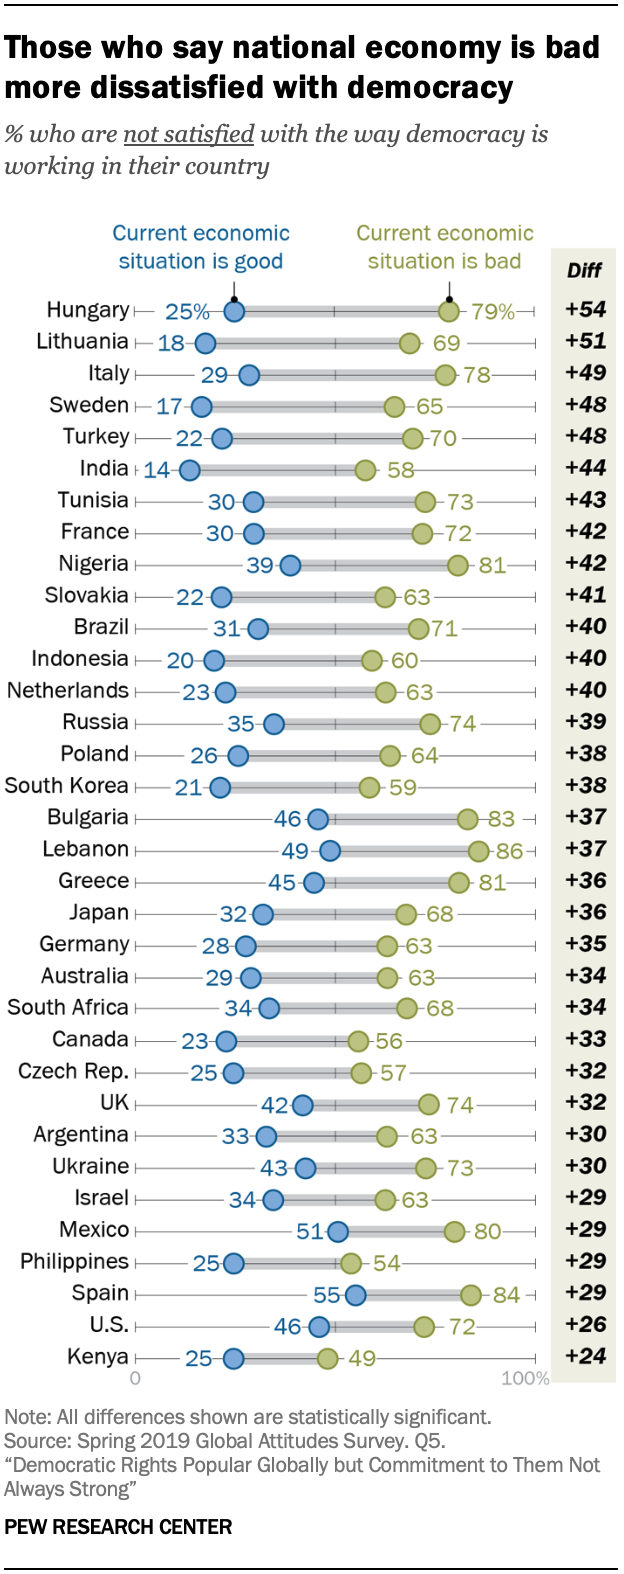 Those who say national economy is bad more dissatisfied with democracy